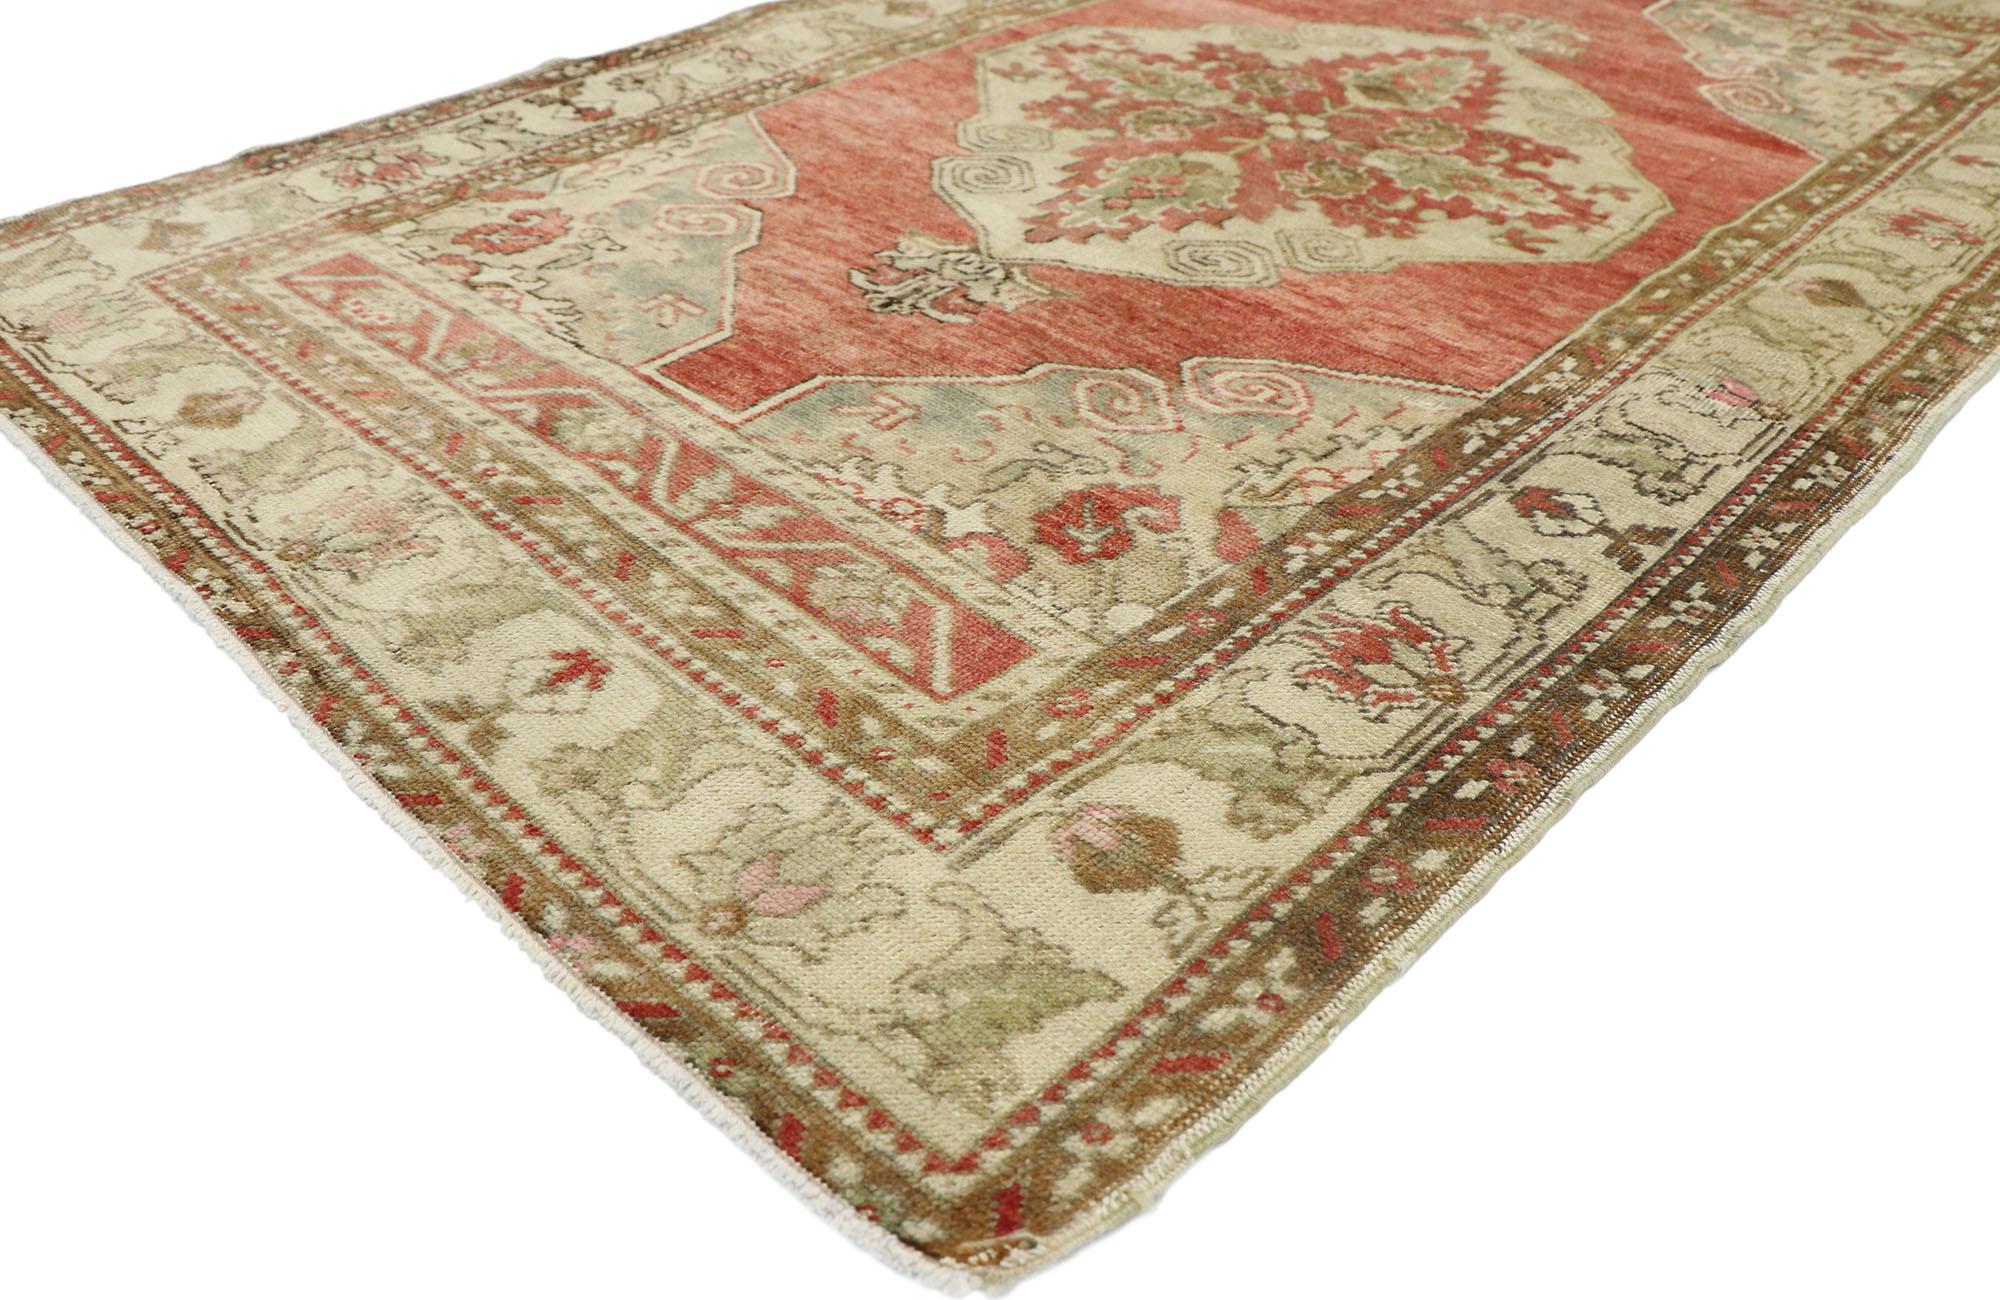 52706 Vintage Turkish Oushak Rug with a Rustic Arts and Crafts Traditional Style 03'04 x 05'07. With a traditional medallion design and subdued elegance, this hand knotted wool vintage Turkish Oushak rug embraces a rustic Arts and Crafts traditional